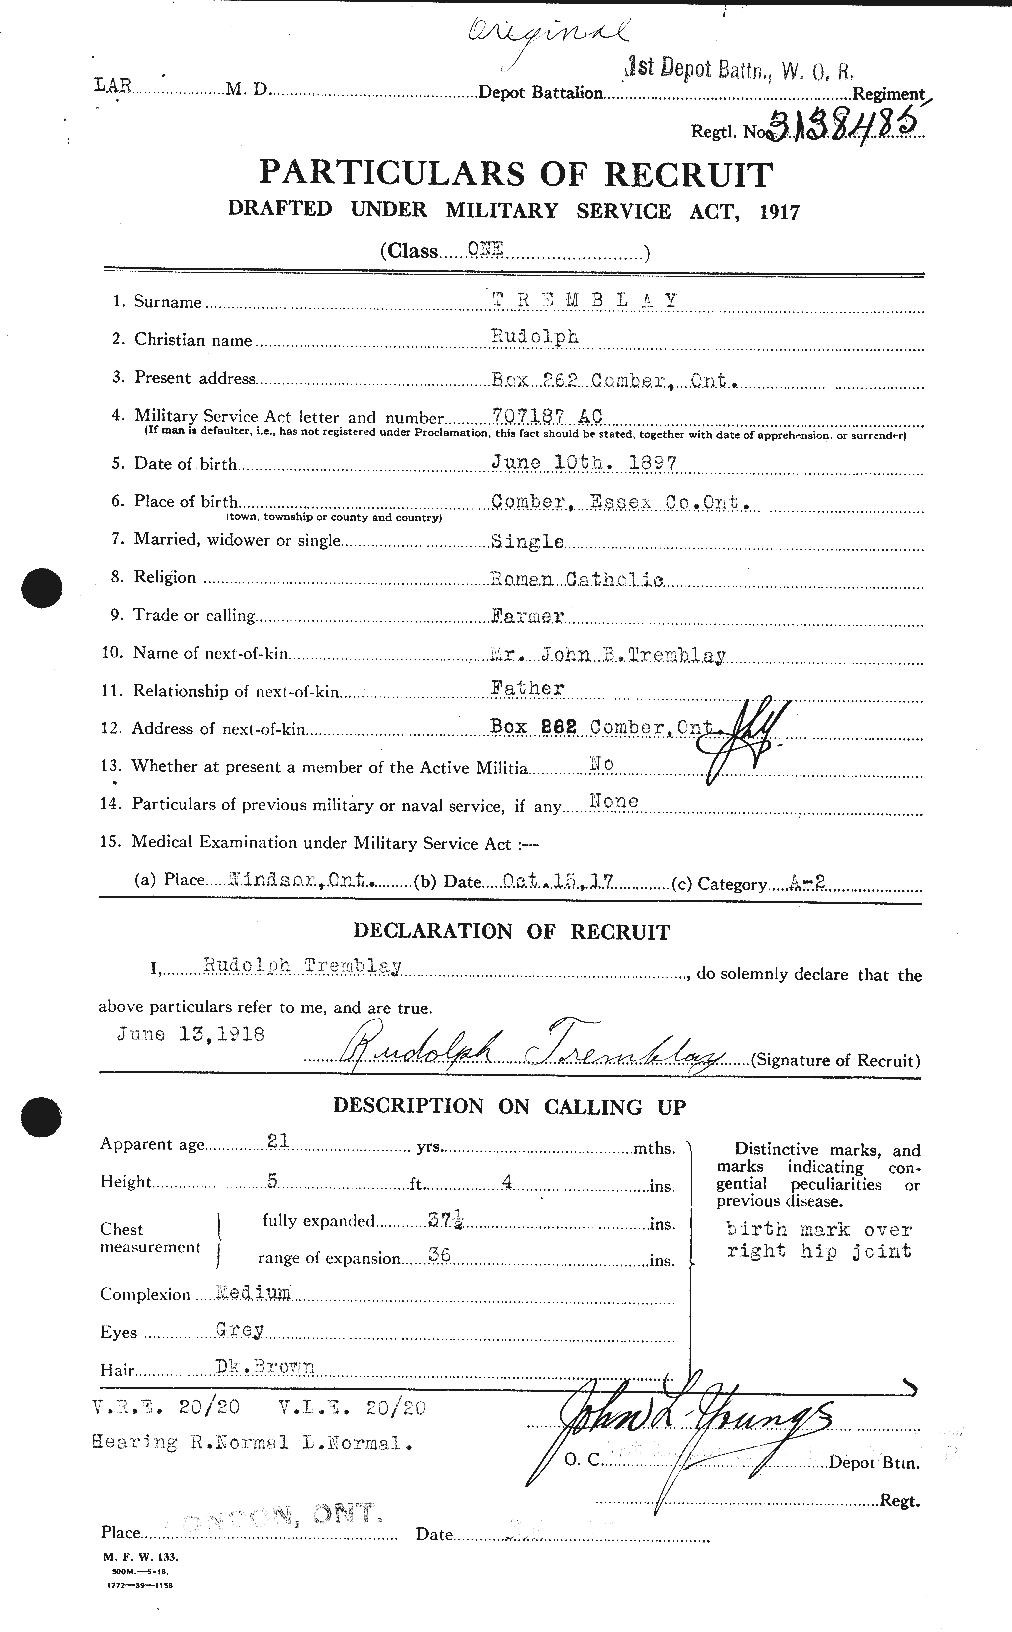 Personnel Records of the First World War - CEF 638304a